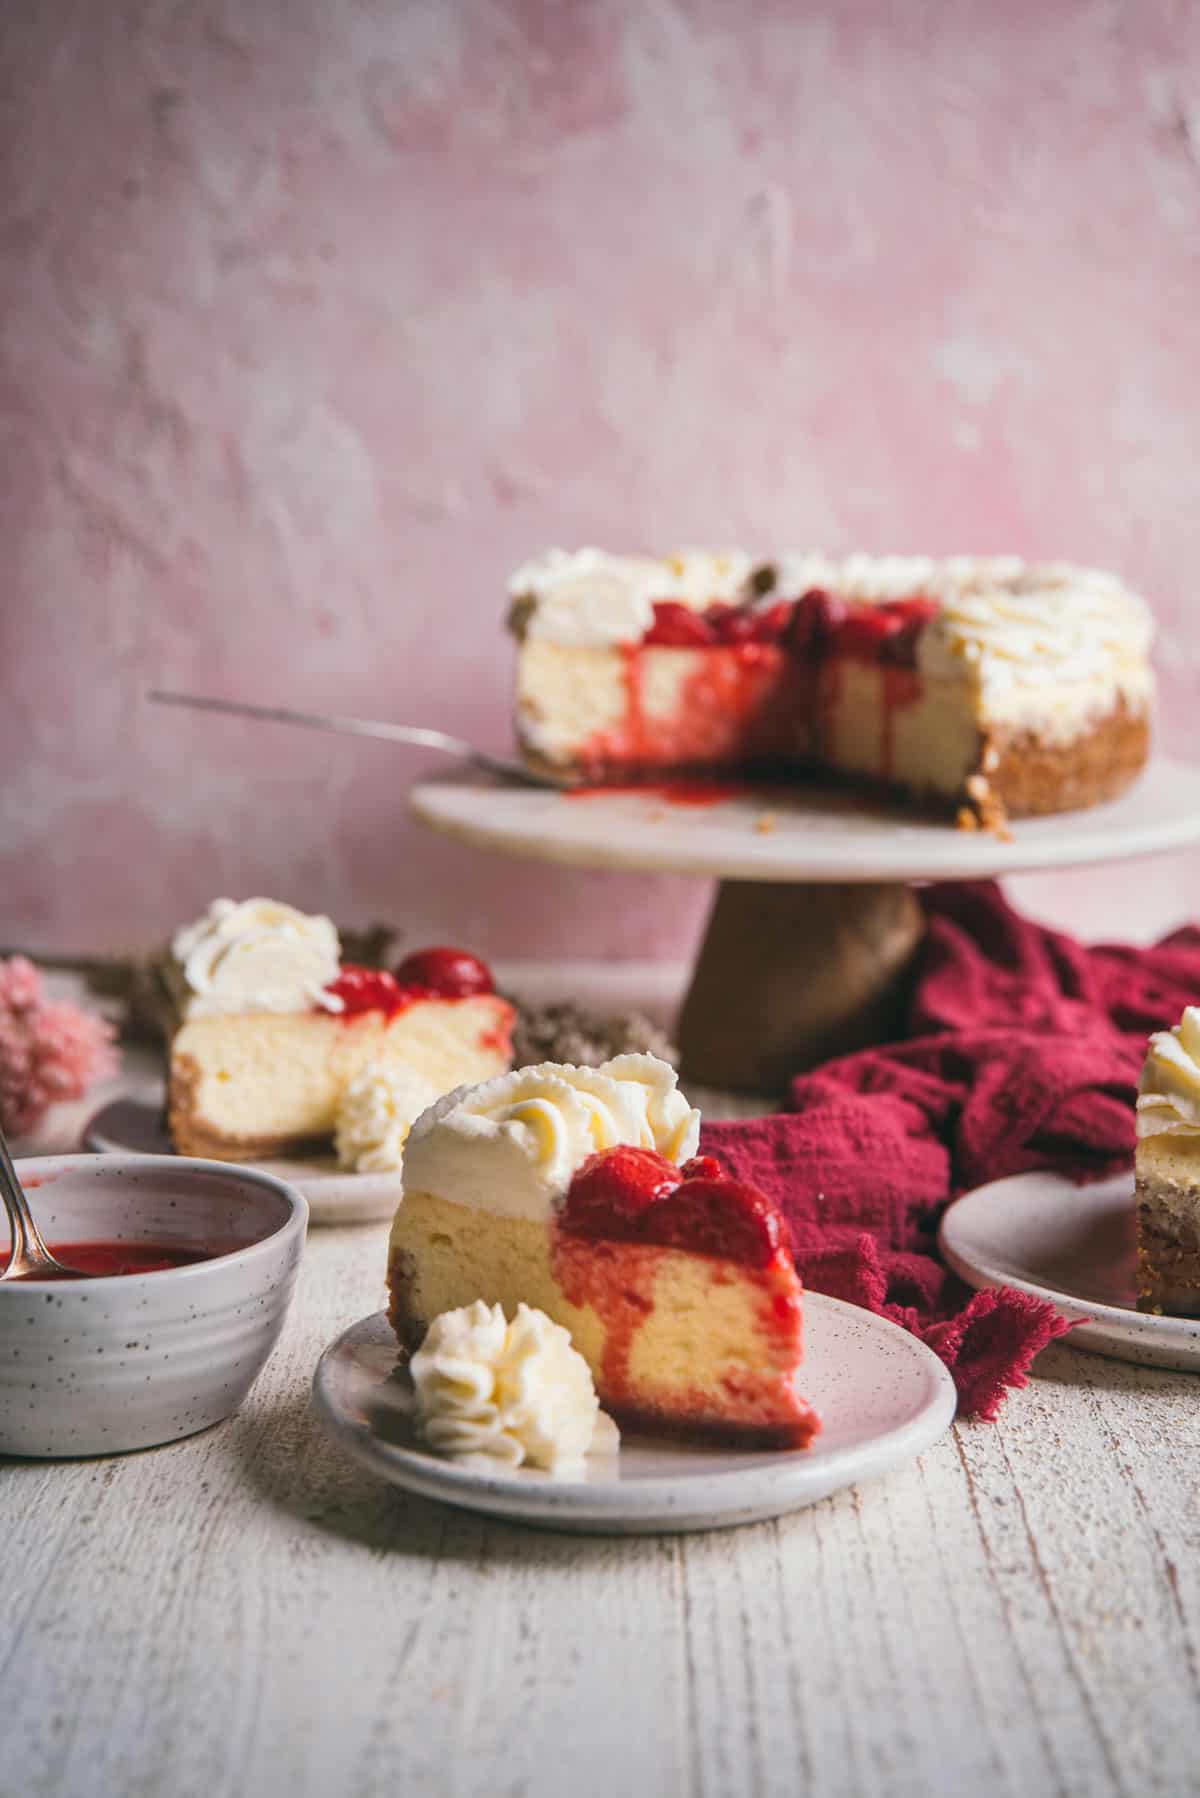 three slices of cheesecake on plates with whipped cream garnish with a strawberry topped cheesecake on a cake stand in the background